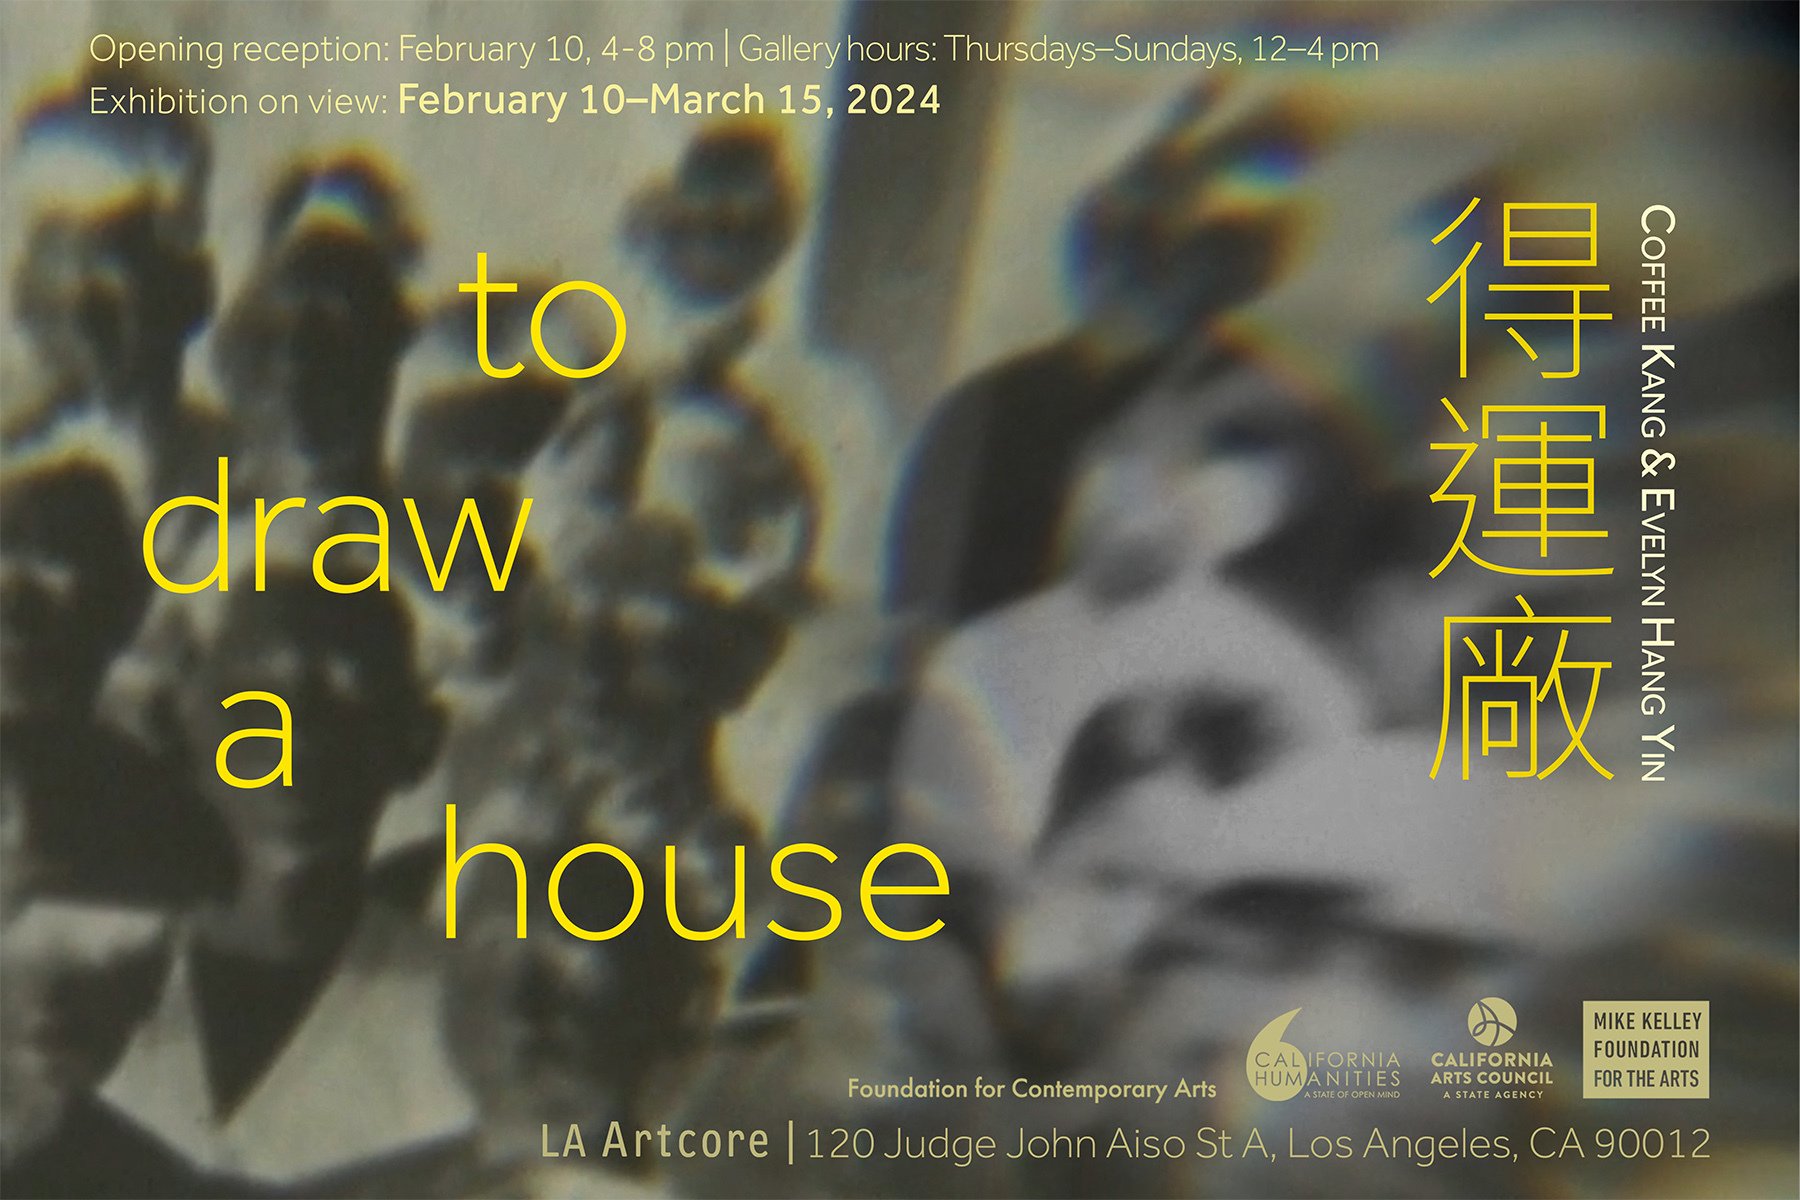 todrawahouse_updated for web_4x6.jpg